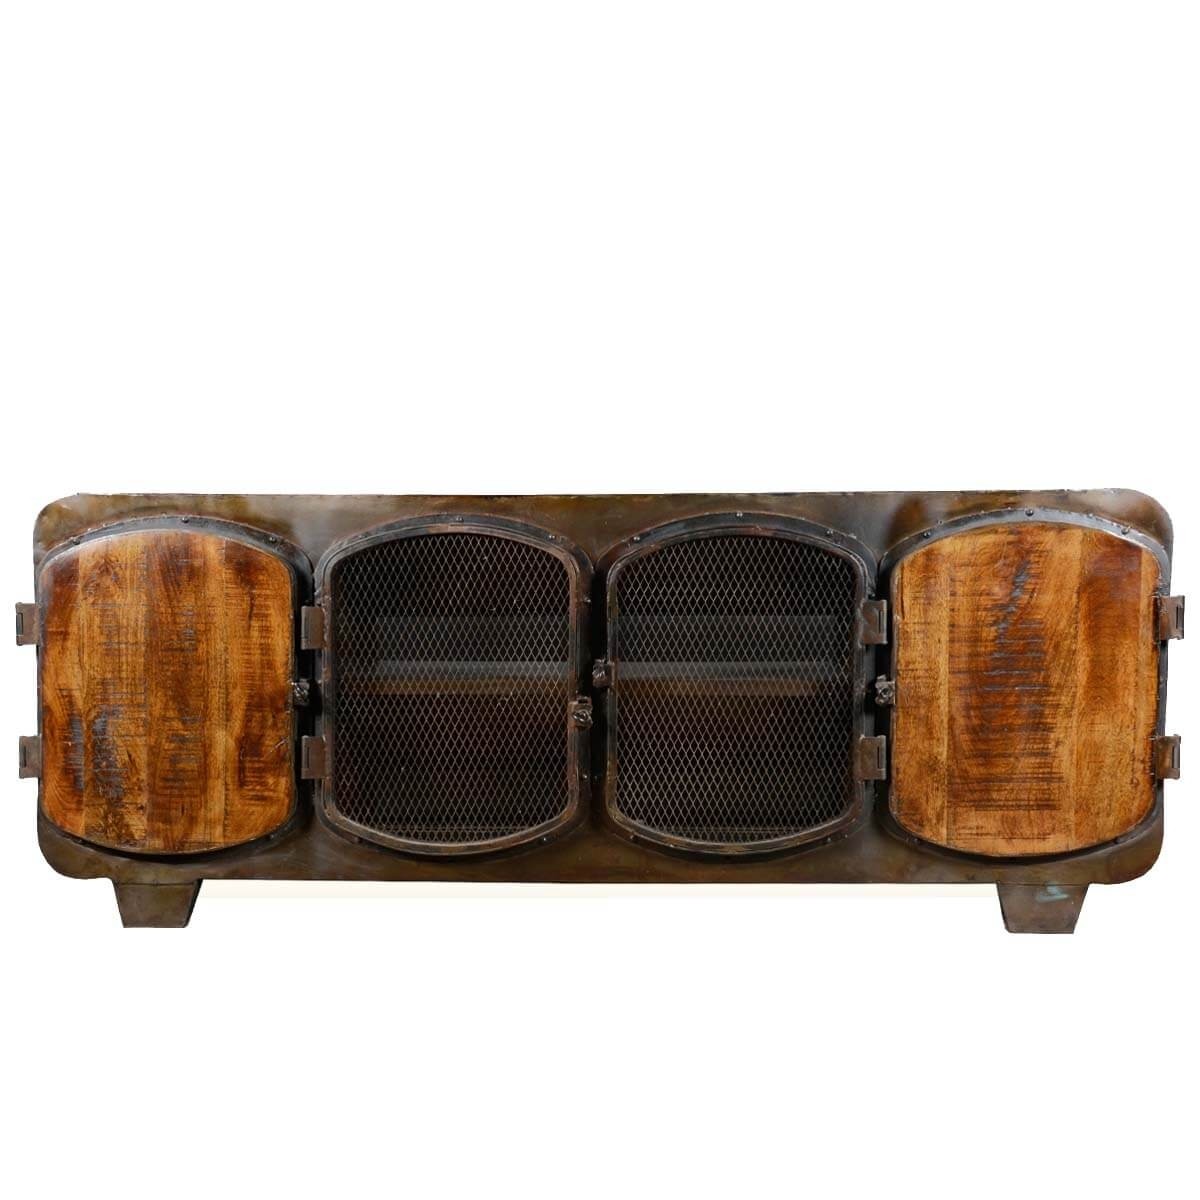 Industrial rustic media console wooden iron tv stand entertainment center